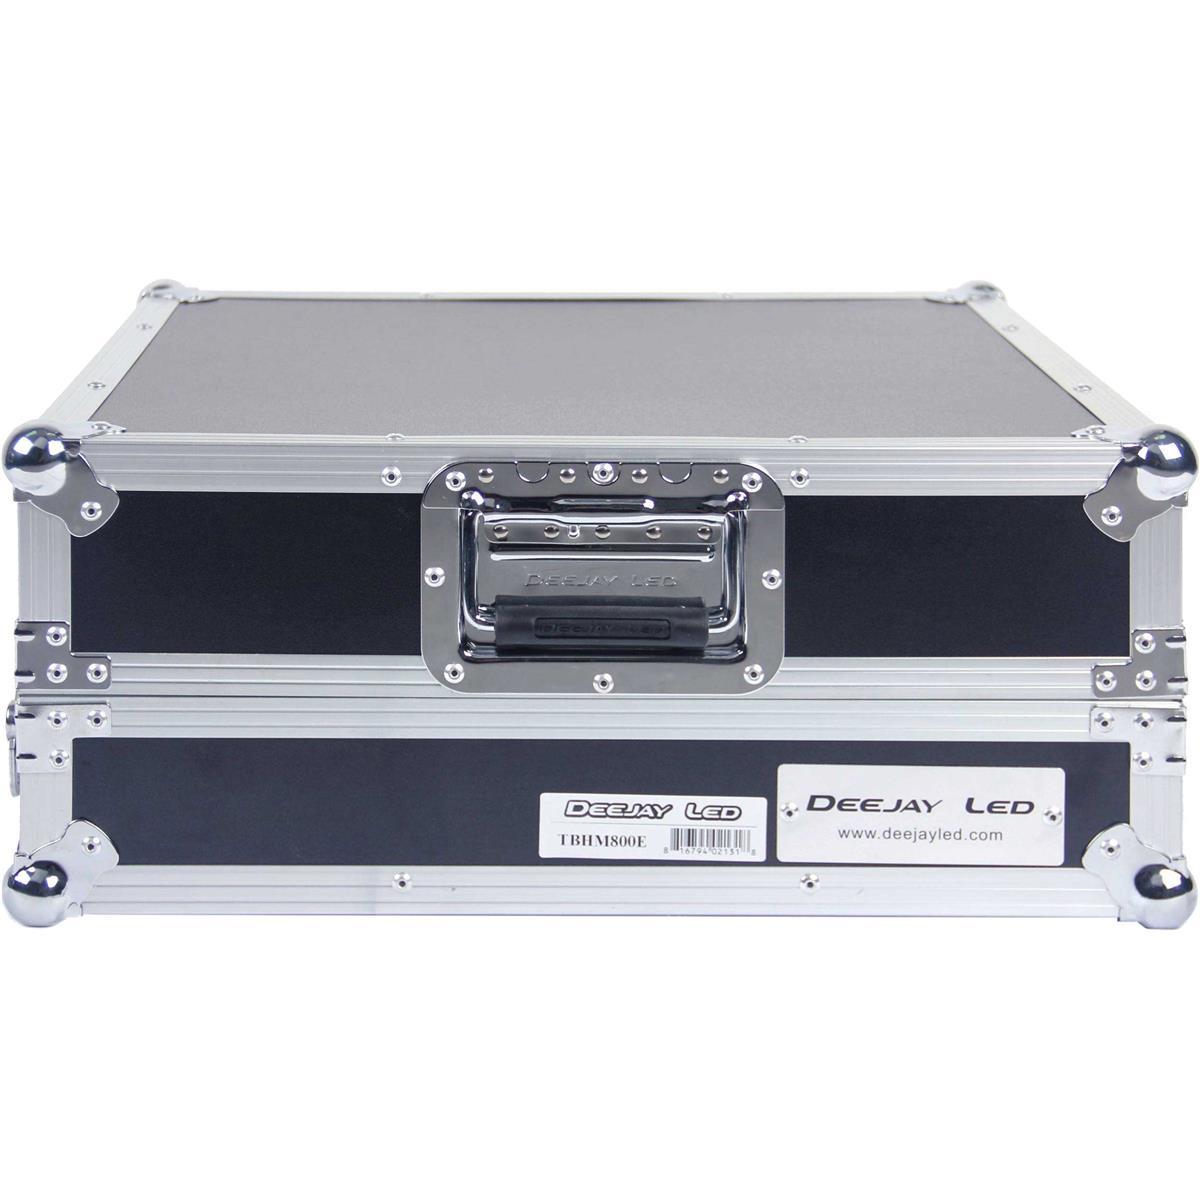 Image of Deejay LED Fly Drive Case 8U Space Slant Mixer Rack